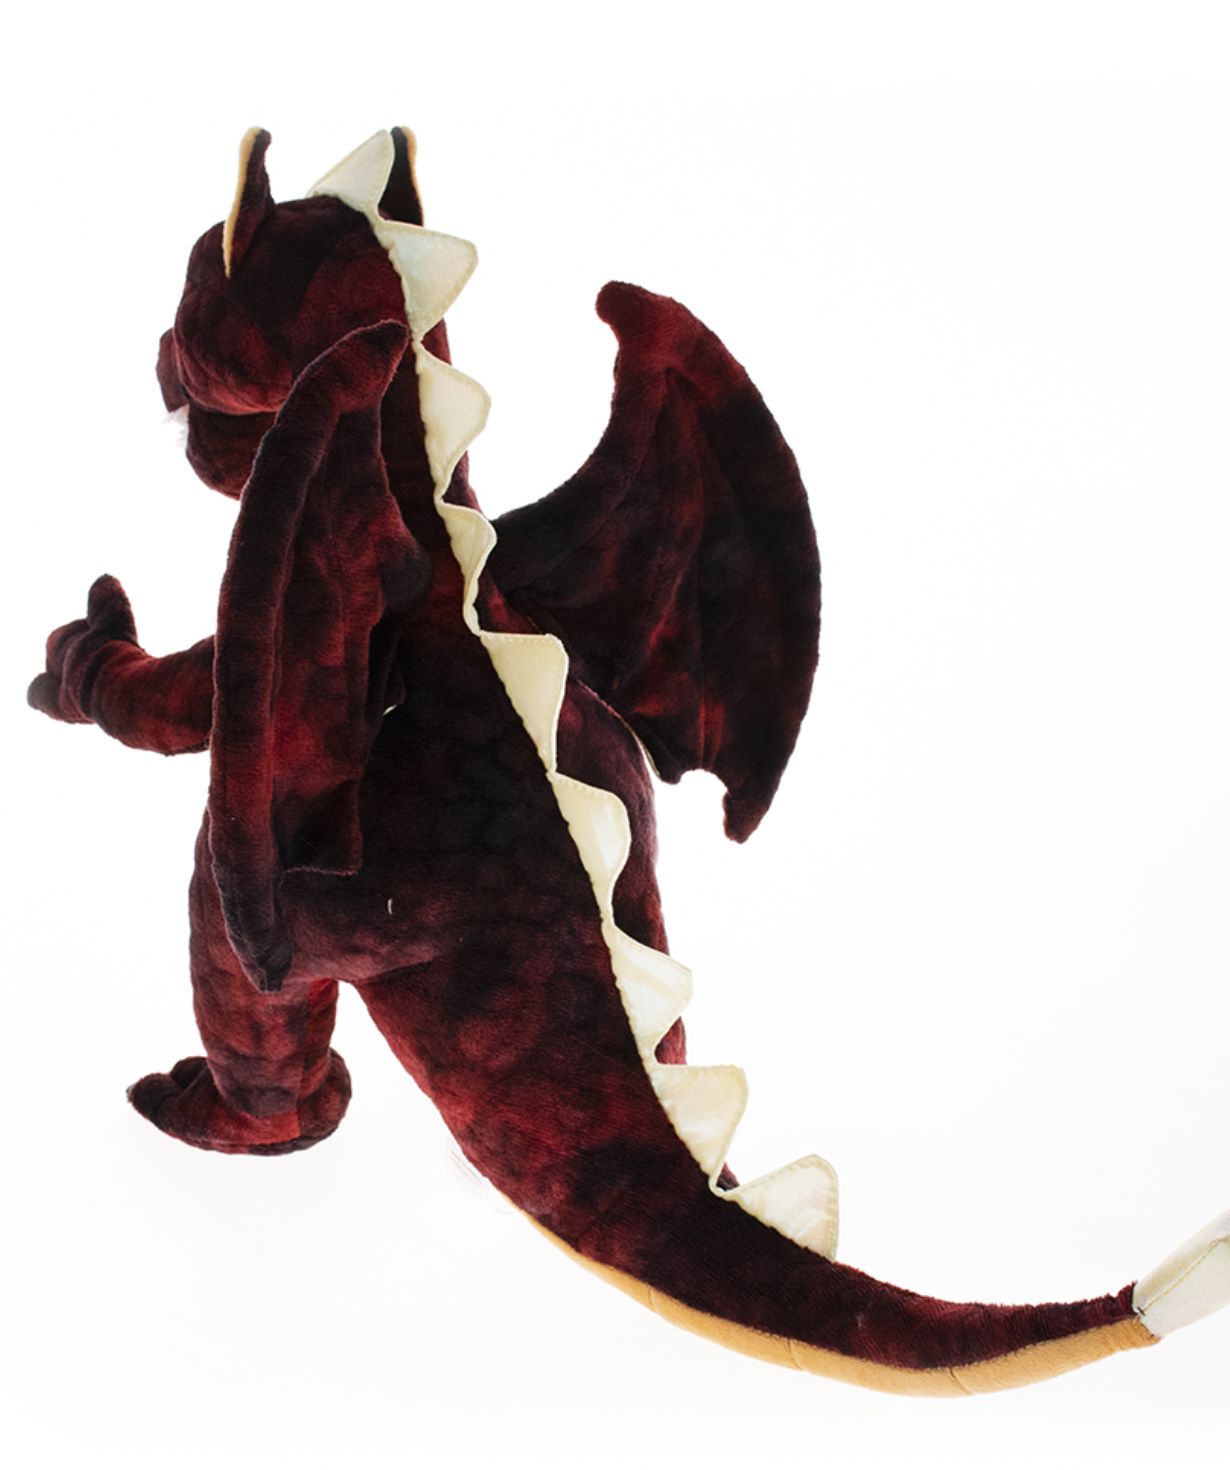 Soft toy dragon red